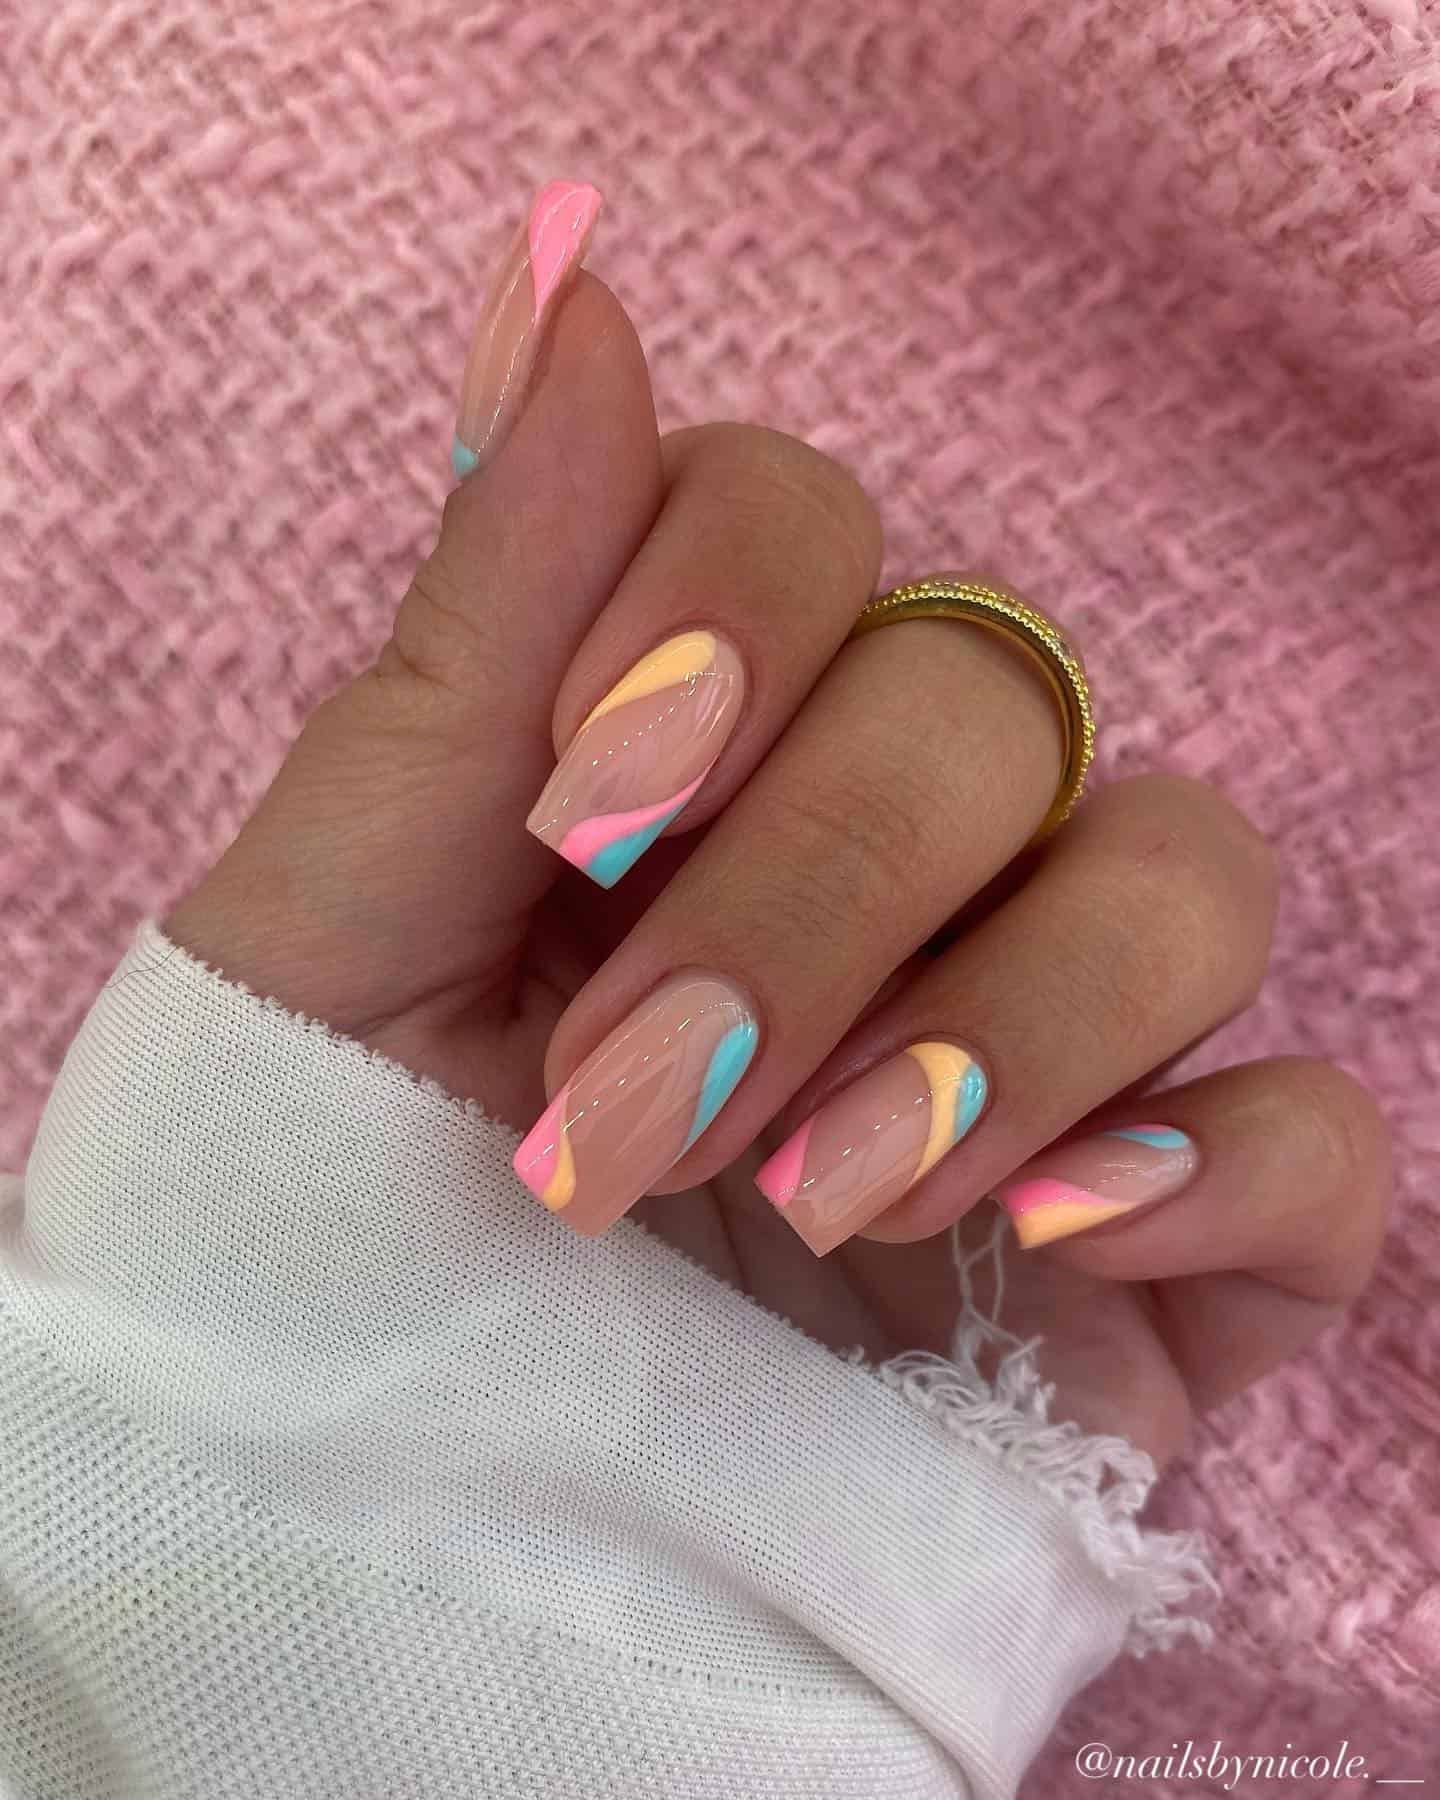 A hand with medium square nails painted a glossy nude color with orange, pink, and light blue wave accents